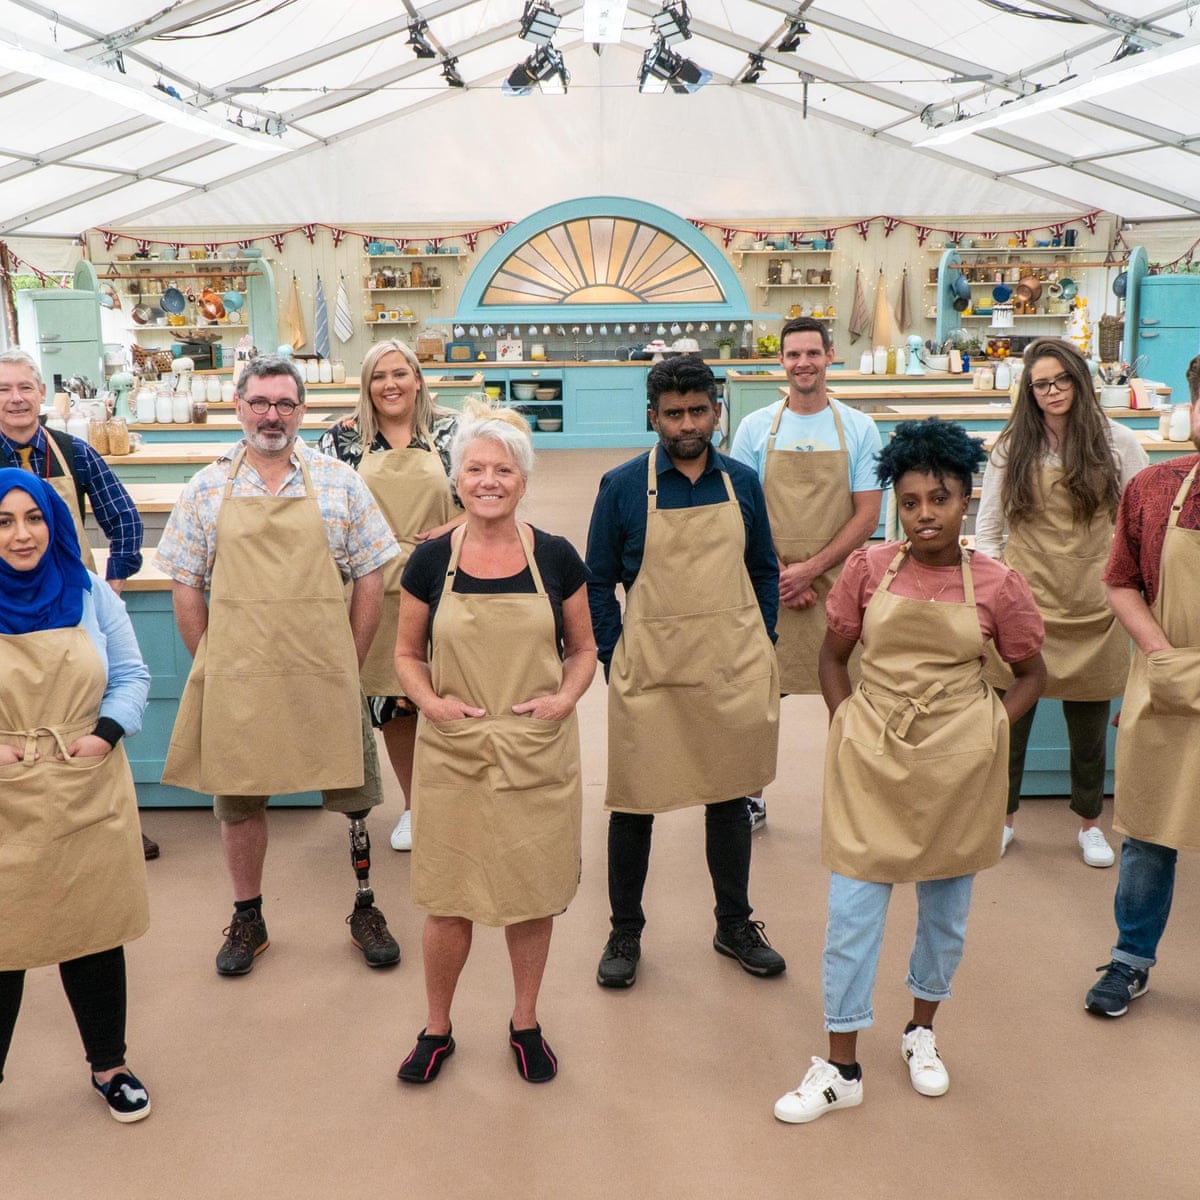 Skelne Hyret Fjord Meet the 2020 Bake Off contestants: can a baker's star rise in a bubble? |  The Great British Bake Off | The Guardian